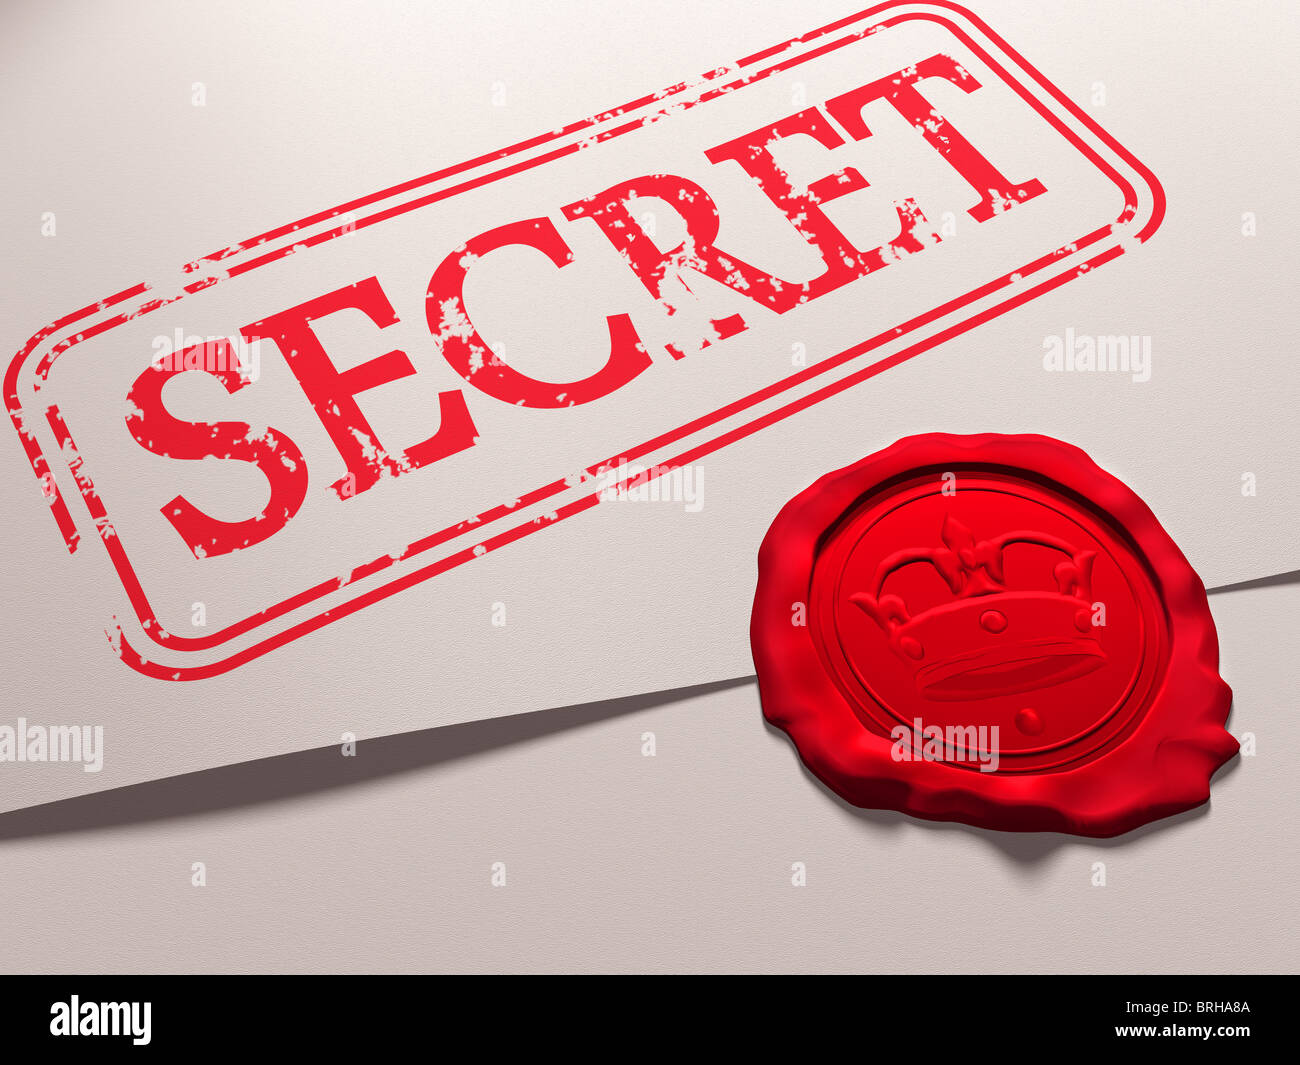 Illustration of a secret document with a wax seal Stock Photo